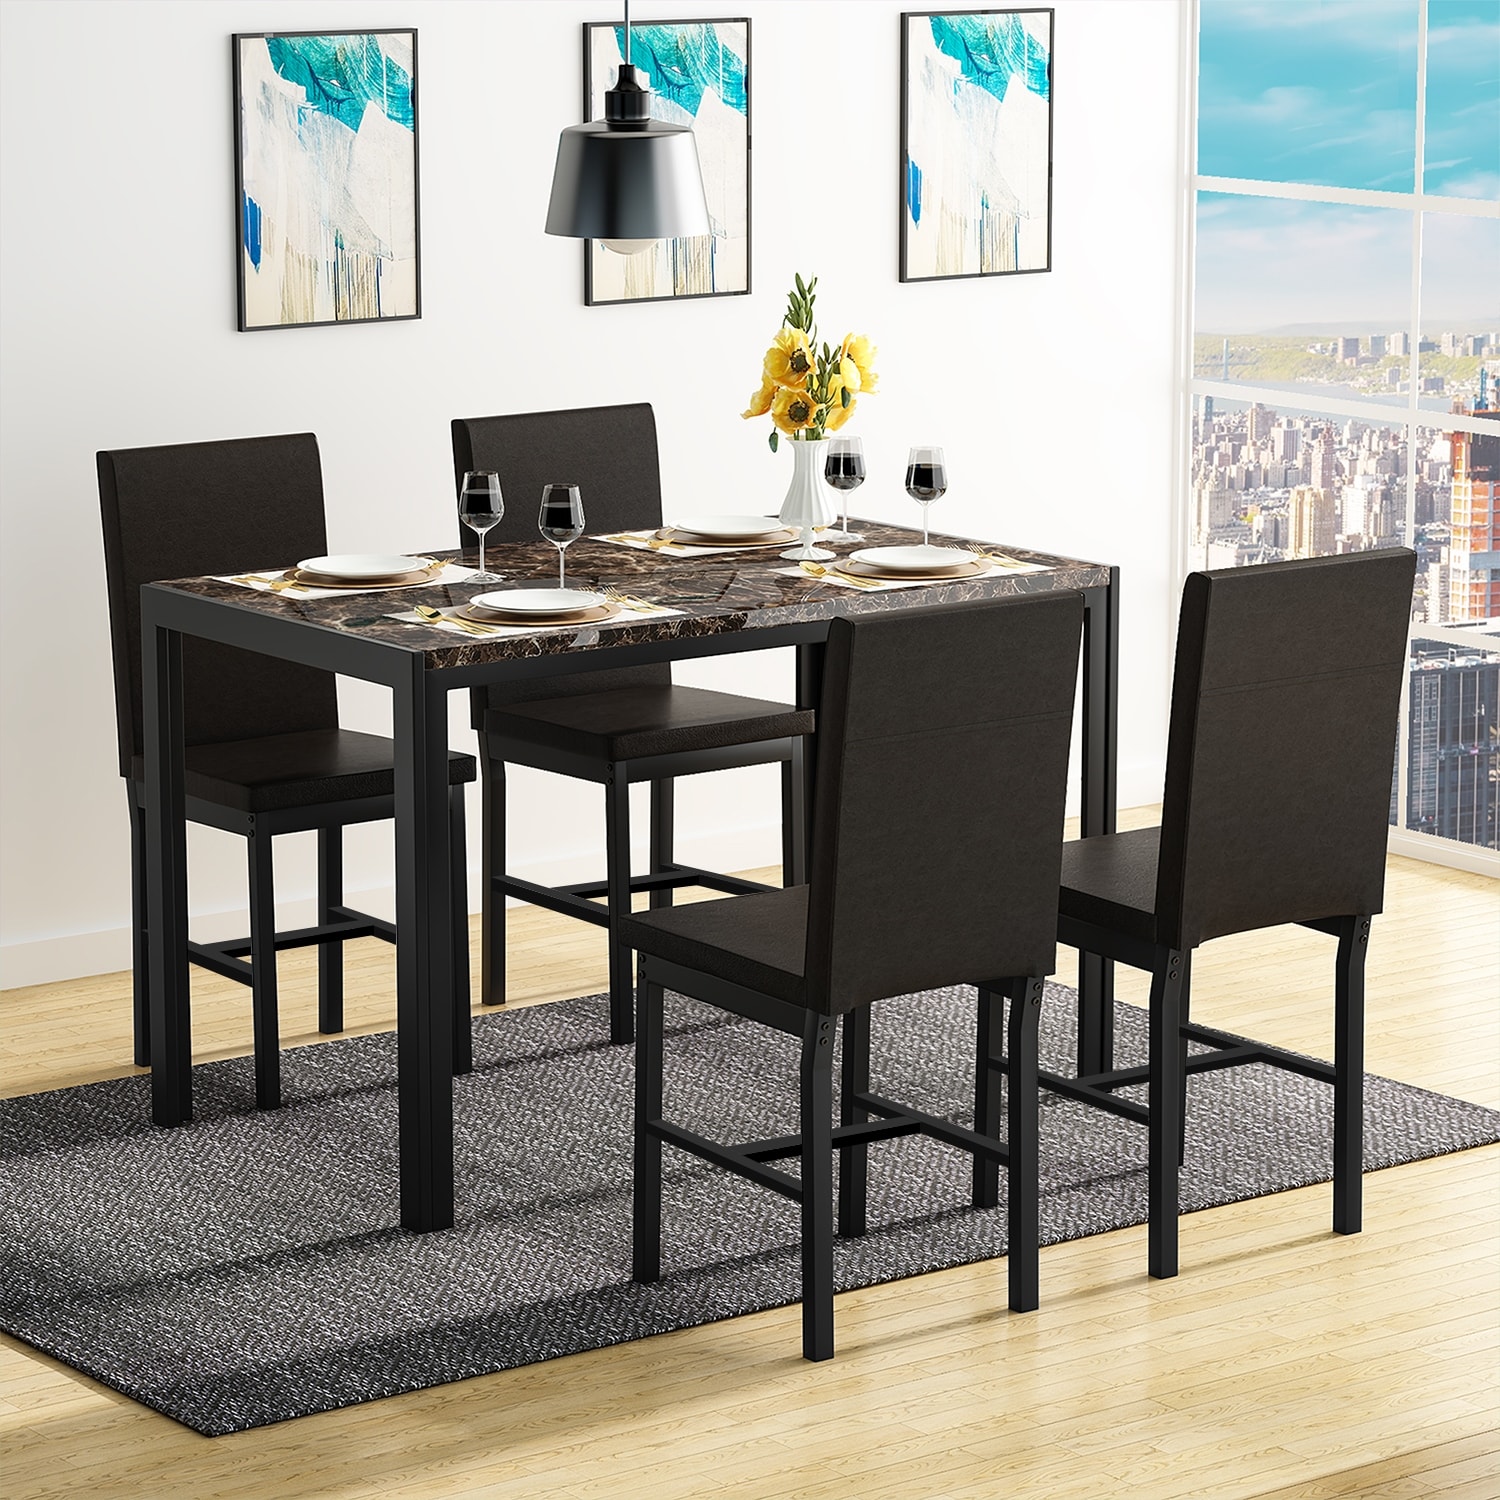 https://ak1.ostkcdn.com/images/products/is/images/direct/c602c1aee5bf692b581675f0919513d5835a877c/Mieres-5-Piece-Dining-Table-Set-with-Faux-Marble-Top-and-4-PU-Leather-Upholstery-Chairs-for-Kitchen-Dining-Room.jpg